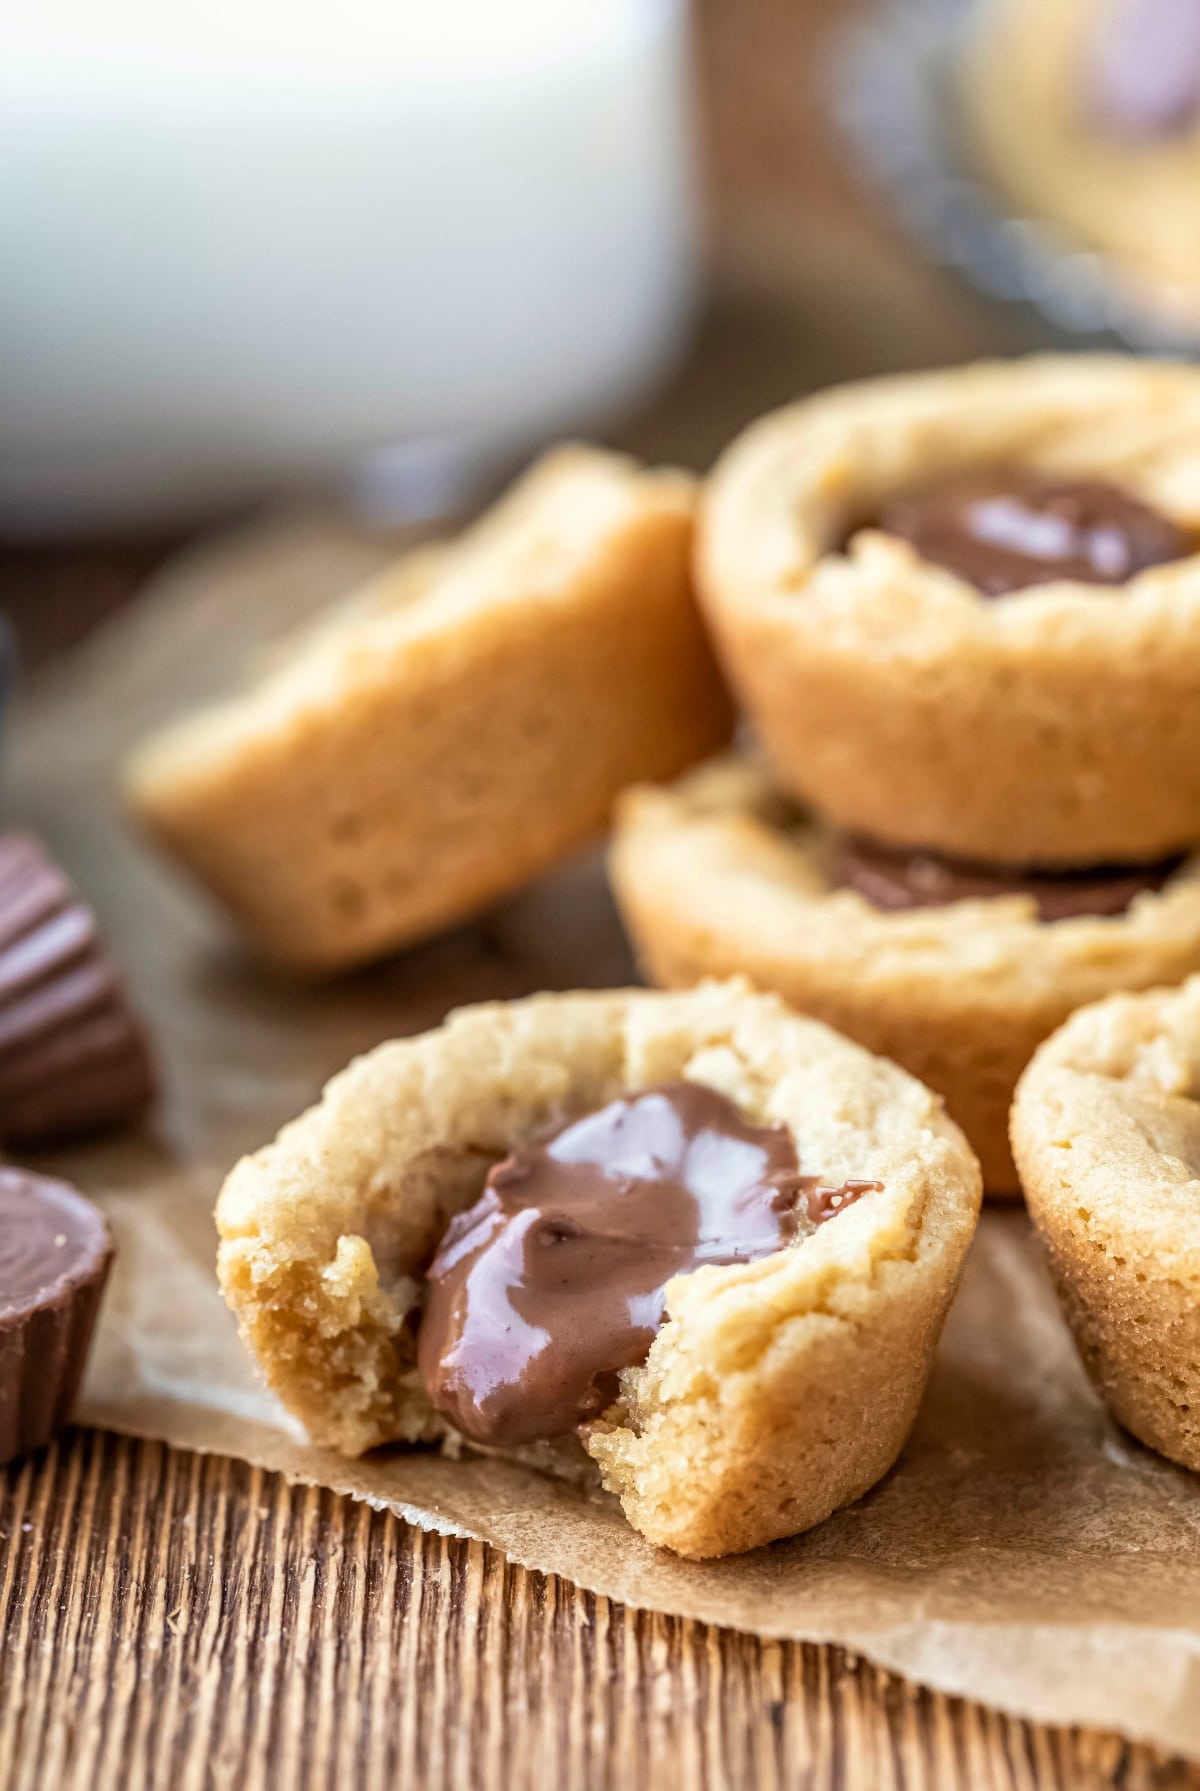 Peanut butter cup cookie with a bite missing